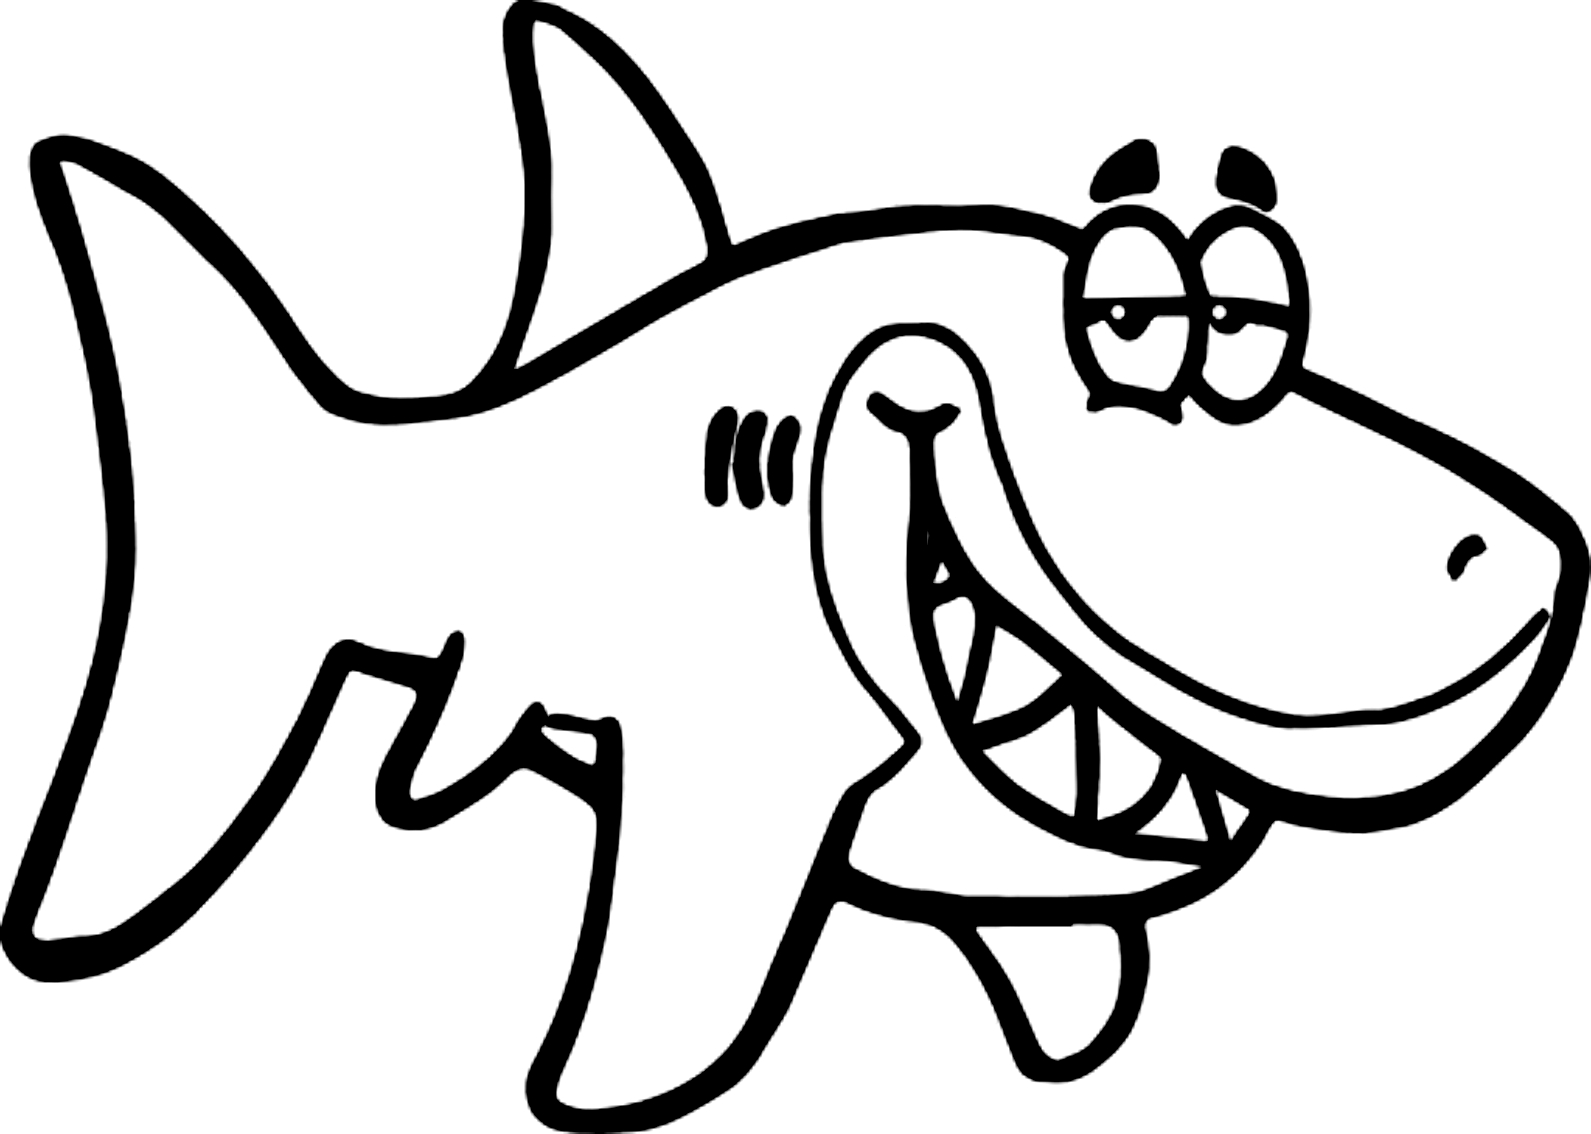 Drawing 17 from Sharks coloring page to print and coloring